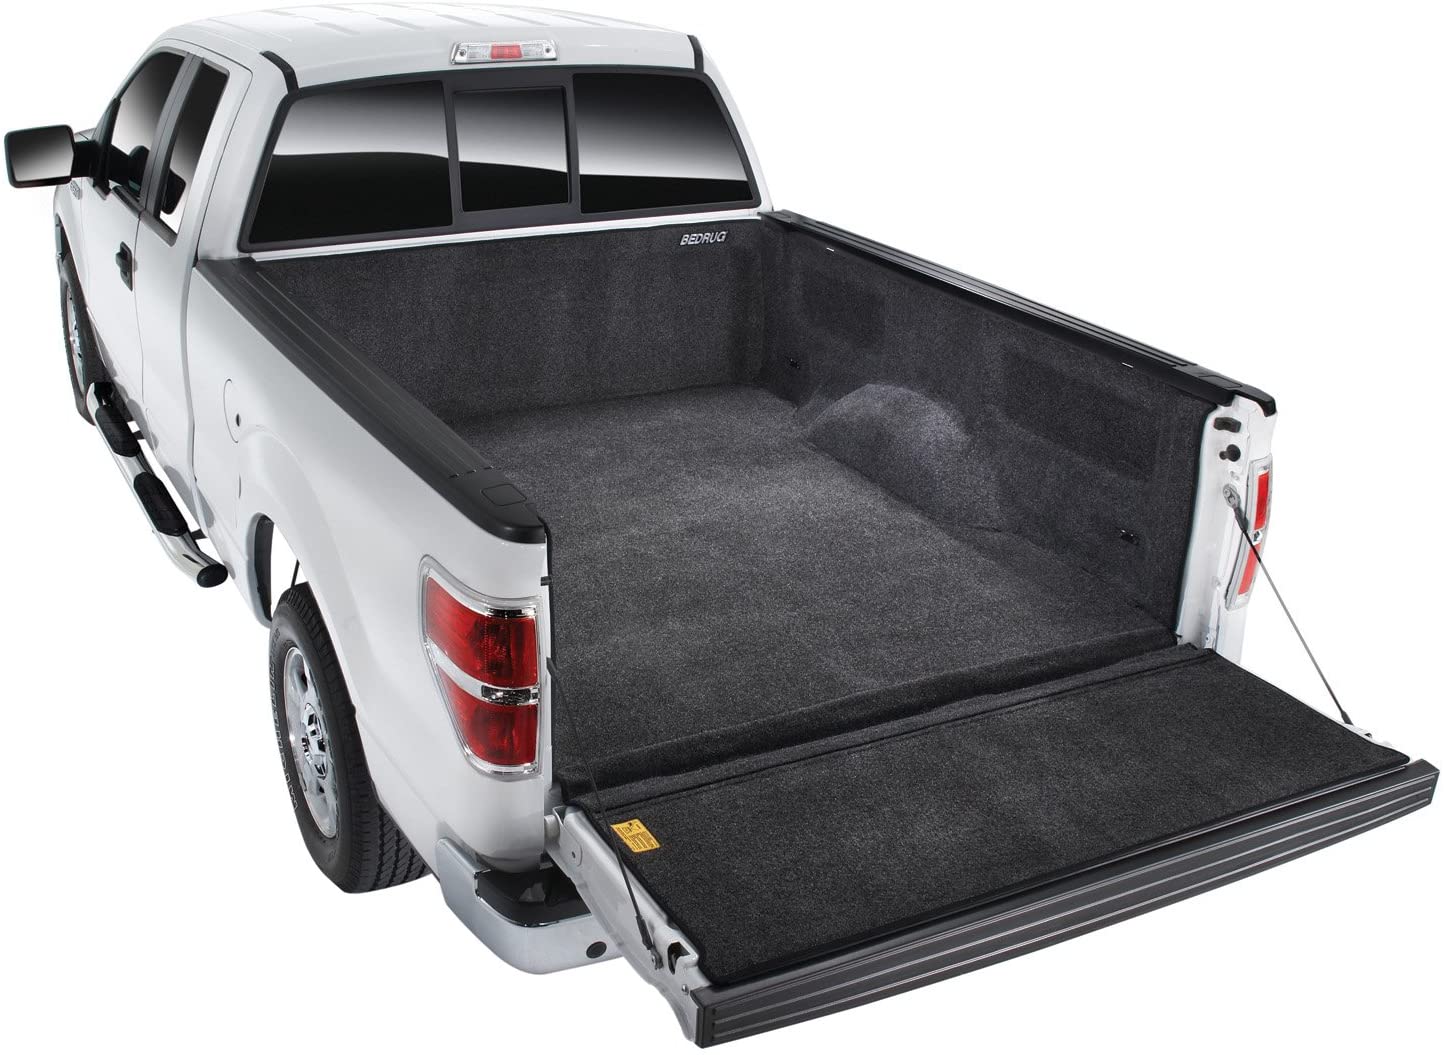 10 Best Bed Liners For Toyota Tundra - Wonderful Engineering